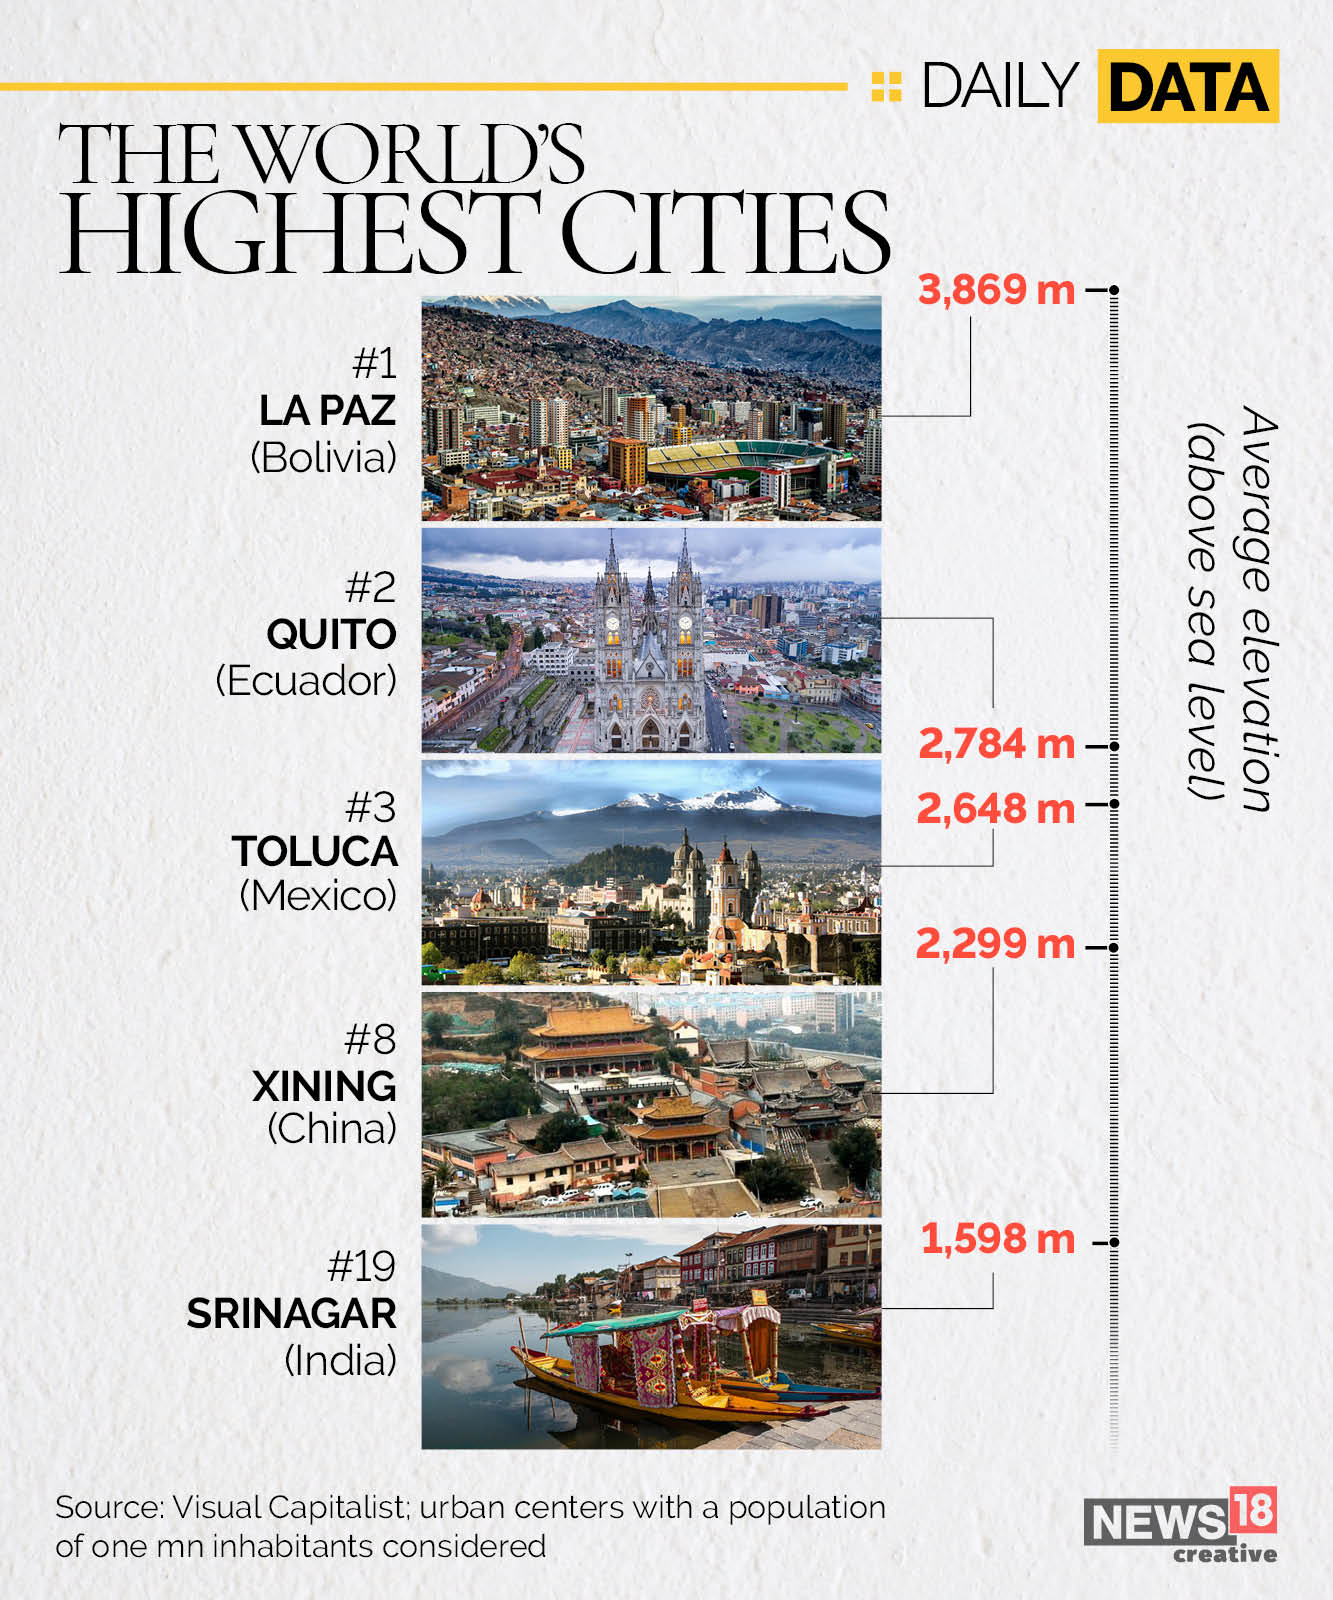 News By Numbers: Which are the world's top 3 highest cities?